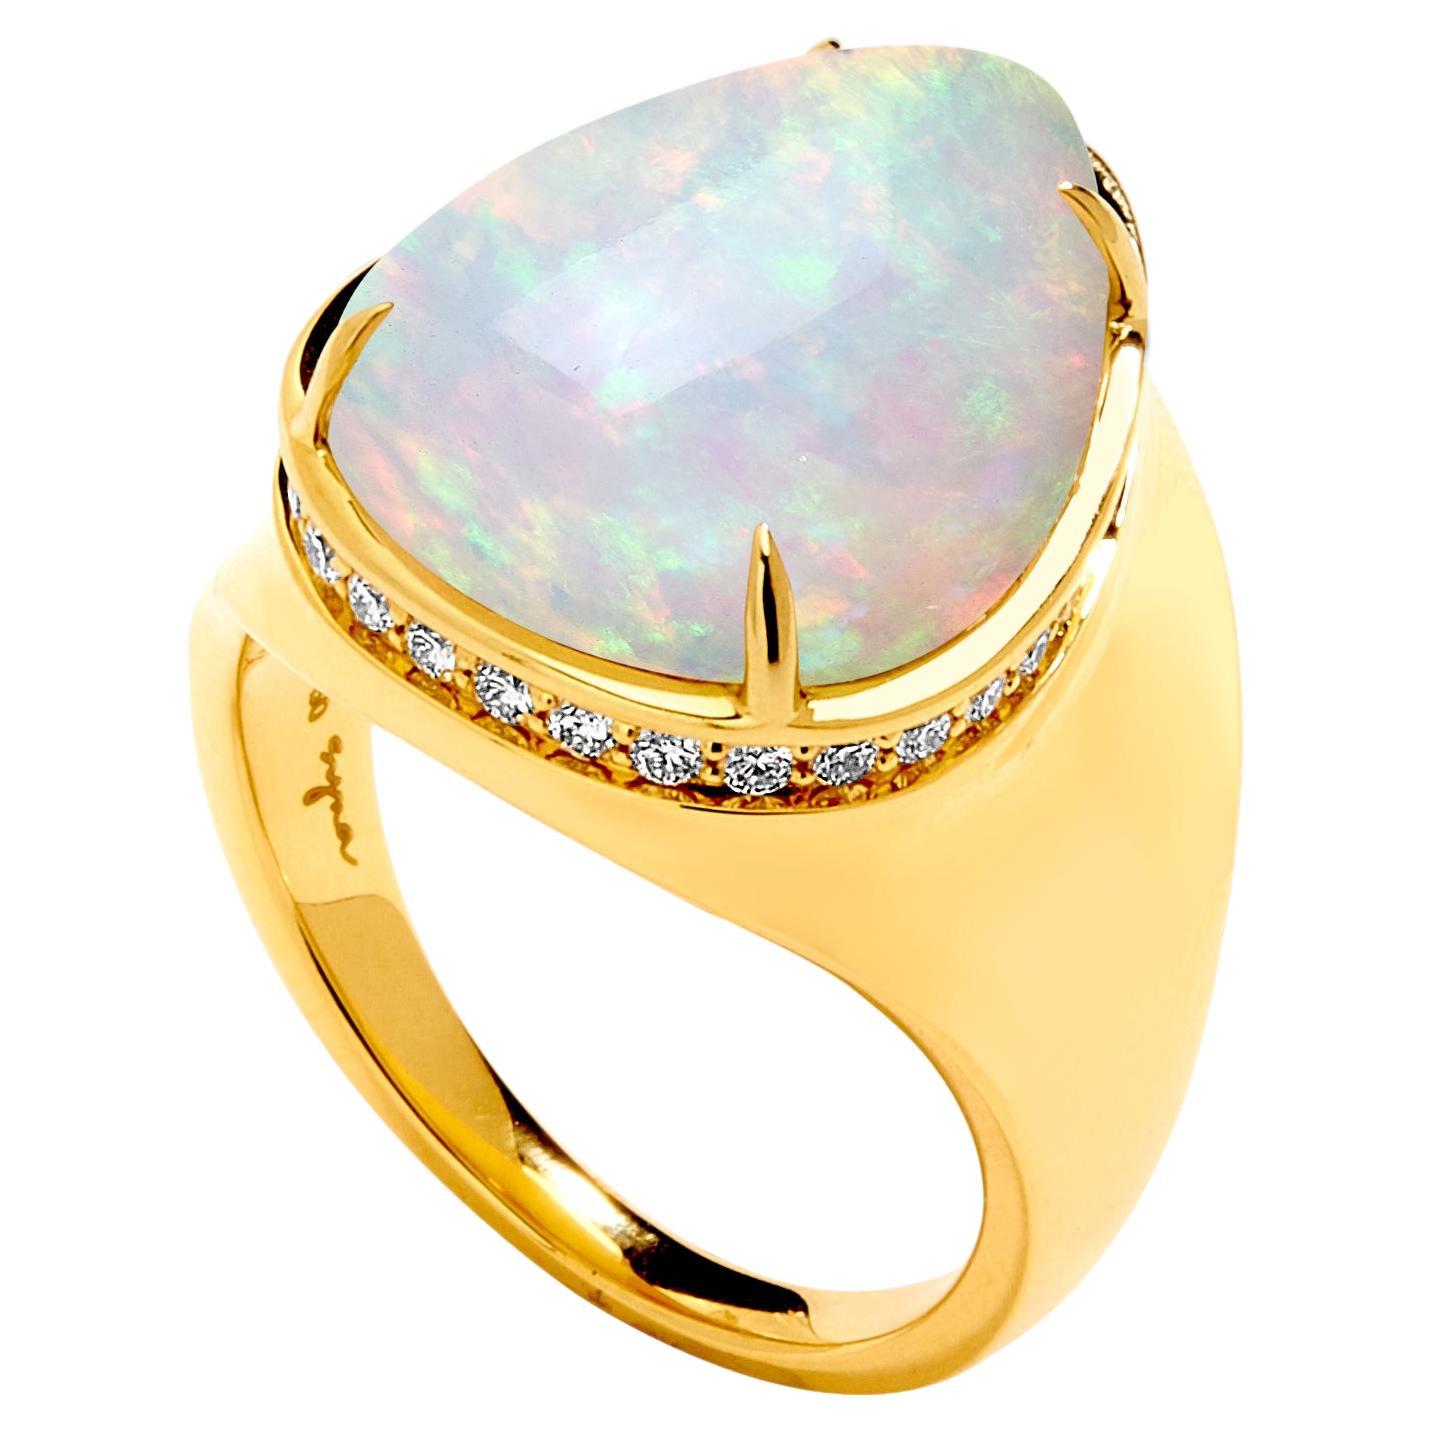 Syna Yellow Gold Ethiopian Opal Pear Shaped Ring with Diamonds